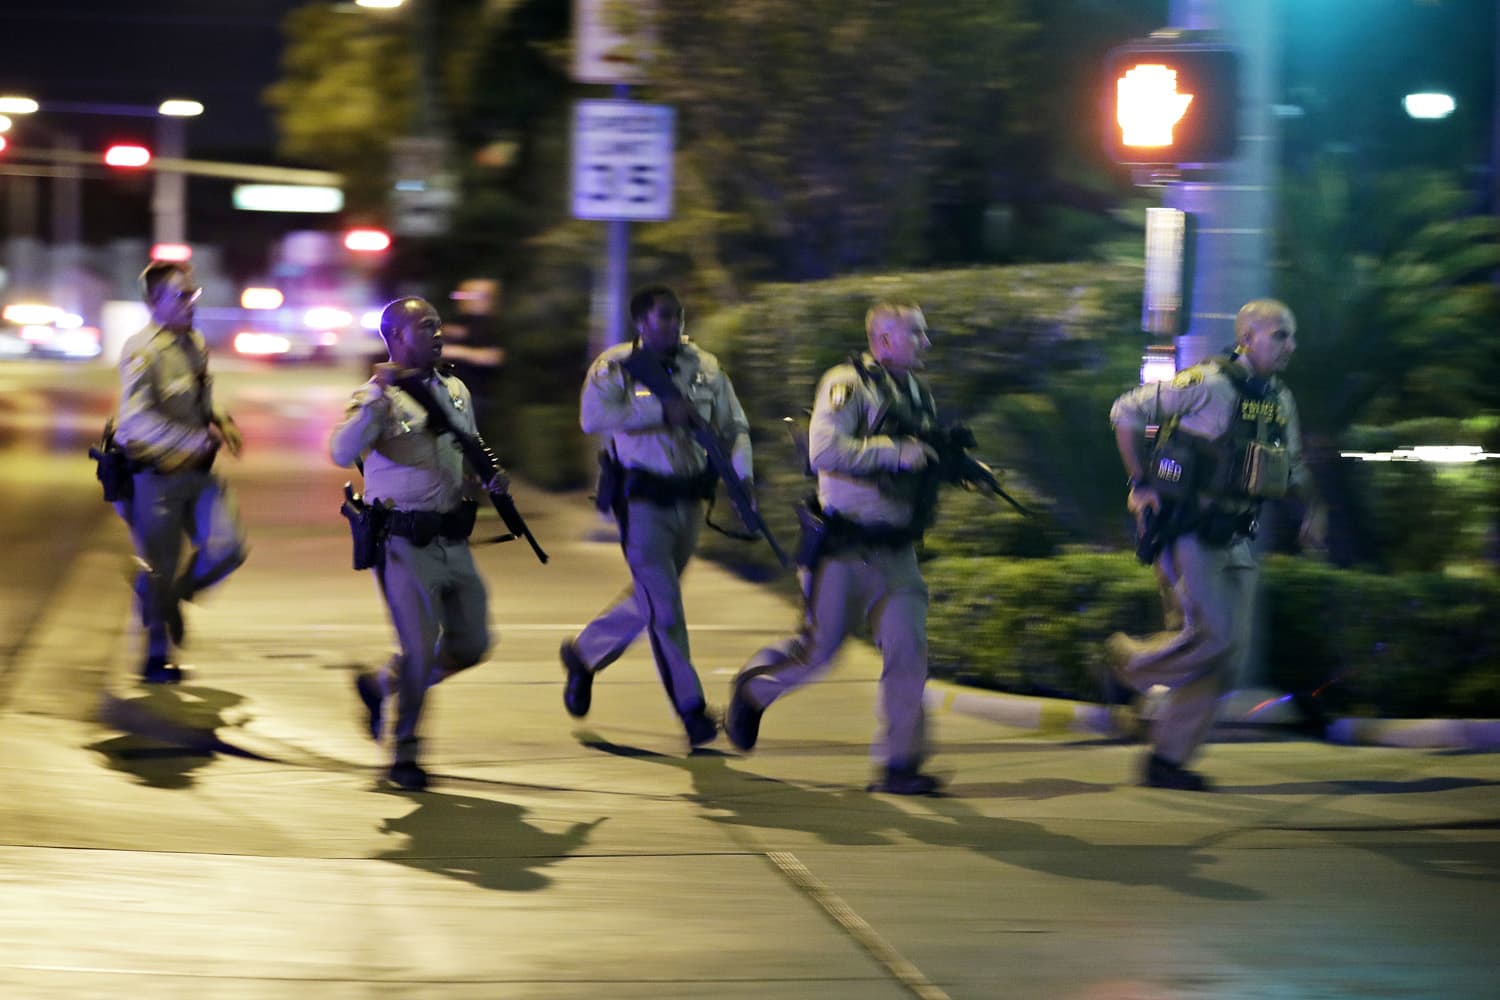 Police run to cover at the scene of a shooting near the Mandalay Bay resort and casino on the Las Vegas Strip, Sunday, Oct. 1, 2017, in Las Vegas. Multiple victims were being transported to hospitals after a shooting late Sunday at a music festival on the Las Vegas Strip. (John Locher/AP)